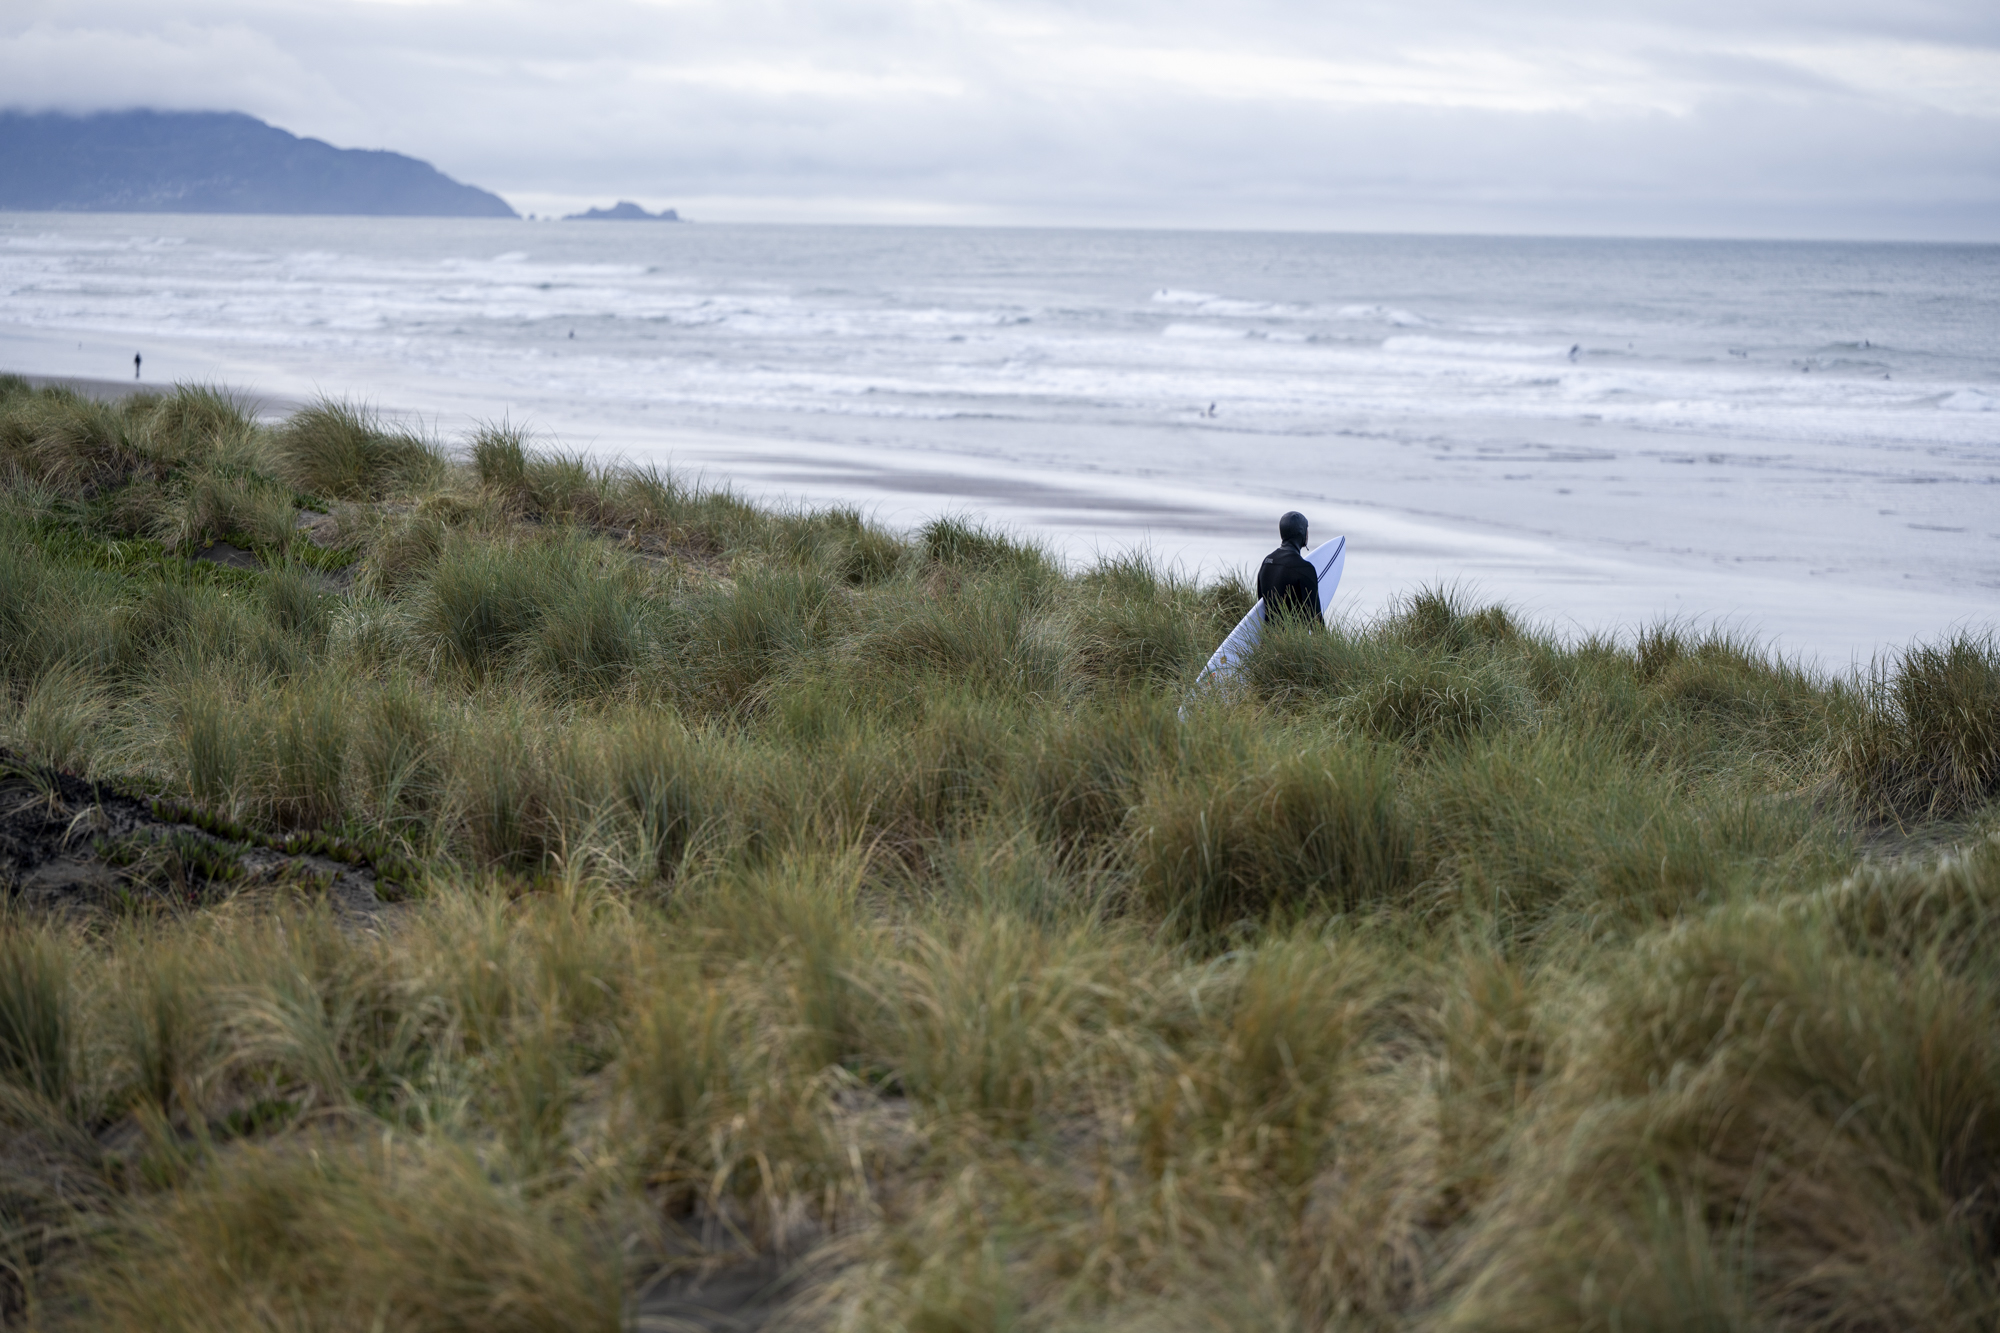 A surfer heads toward the water in tall grass with the ocean stretching out to a cloudy gray horizon.